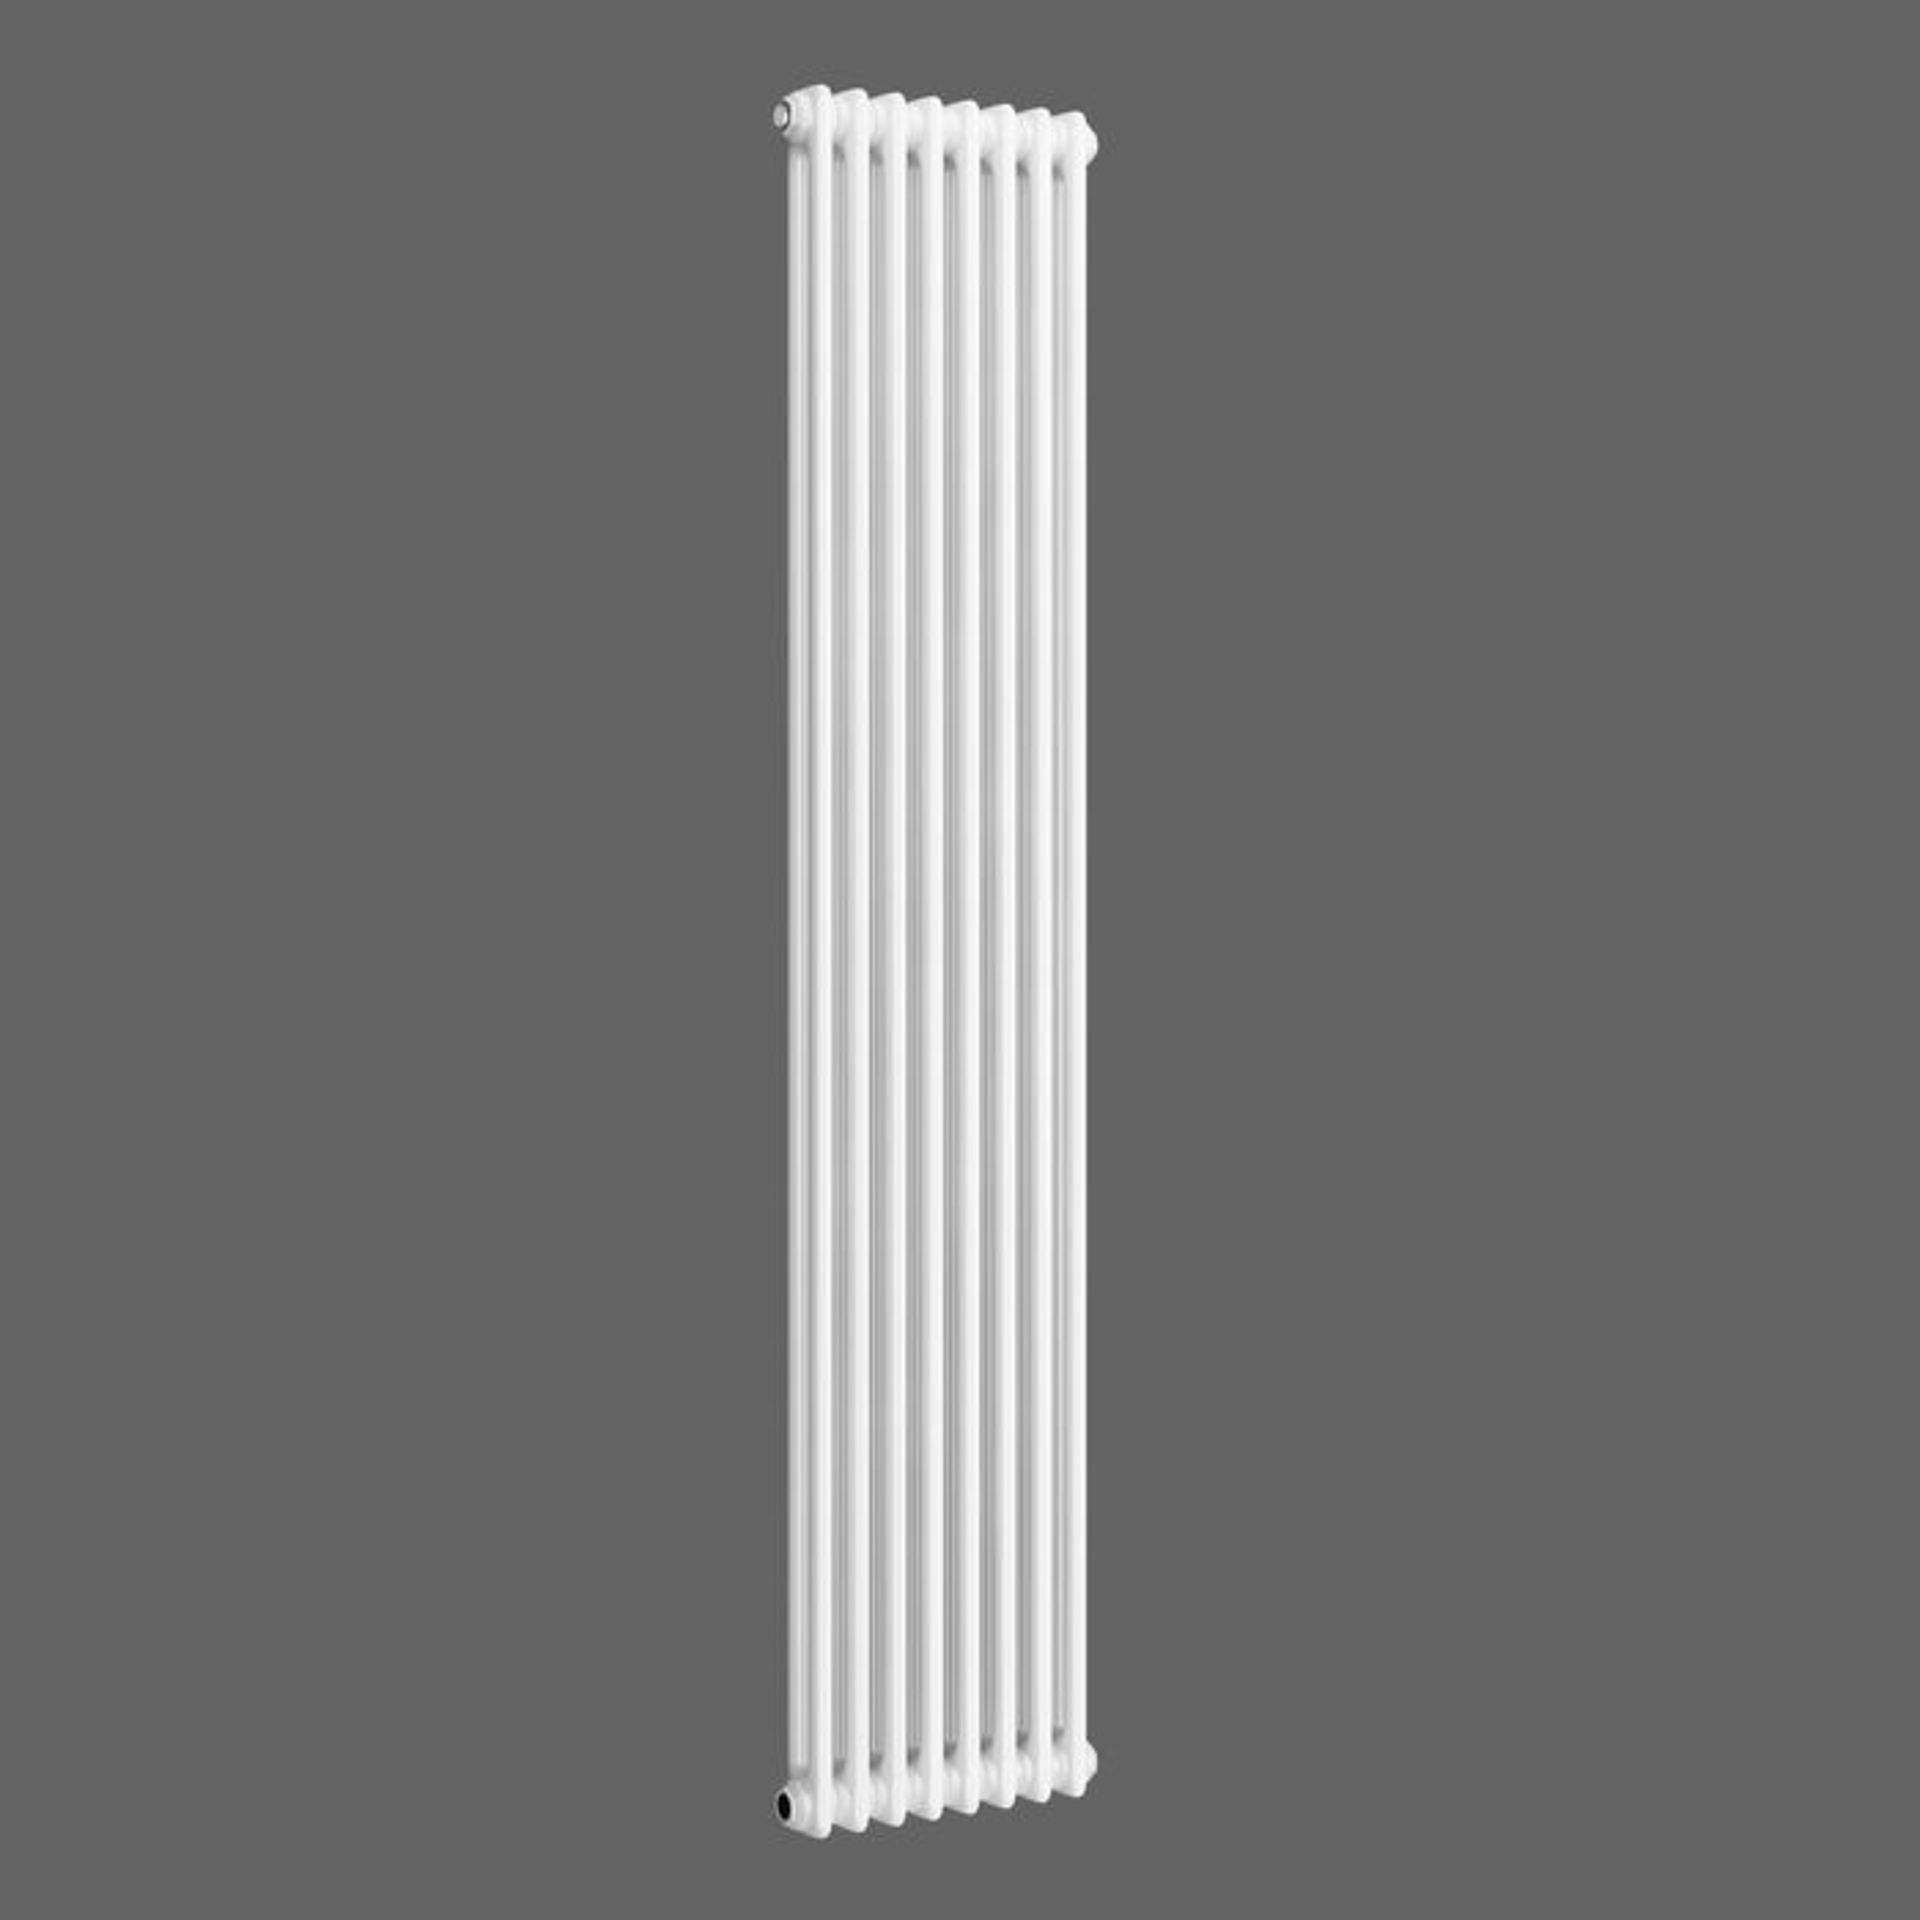 (QW73) 2000x306mm White Double Panel Vertical Colosseum Traditional Radiator. RRP £408.99. - Image 8 of 8